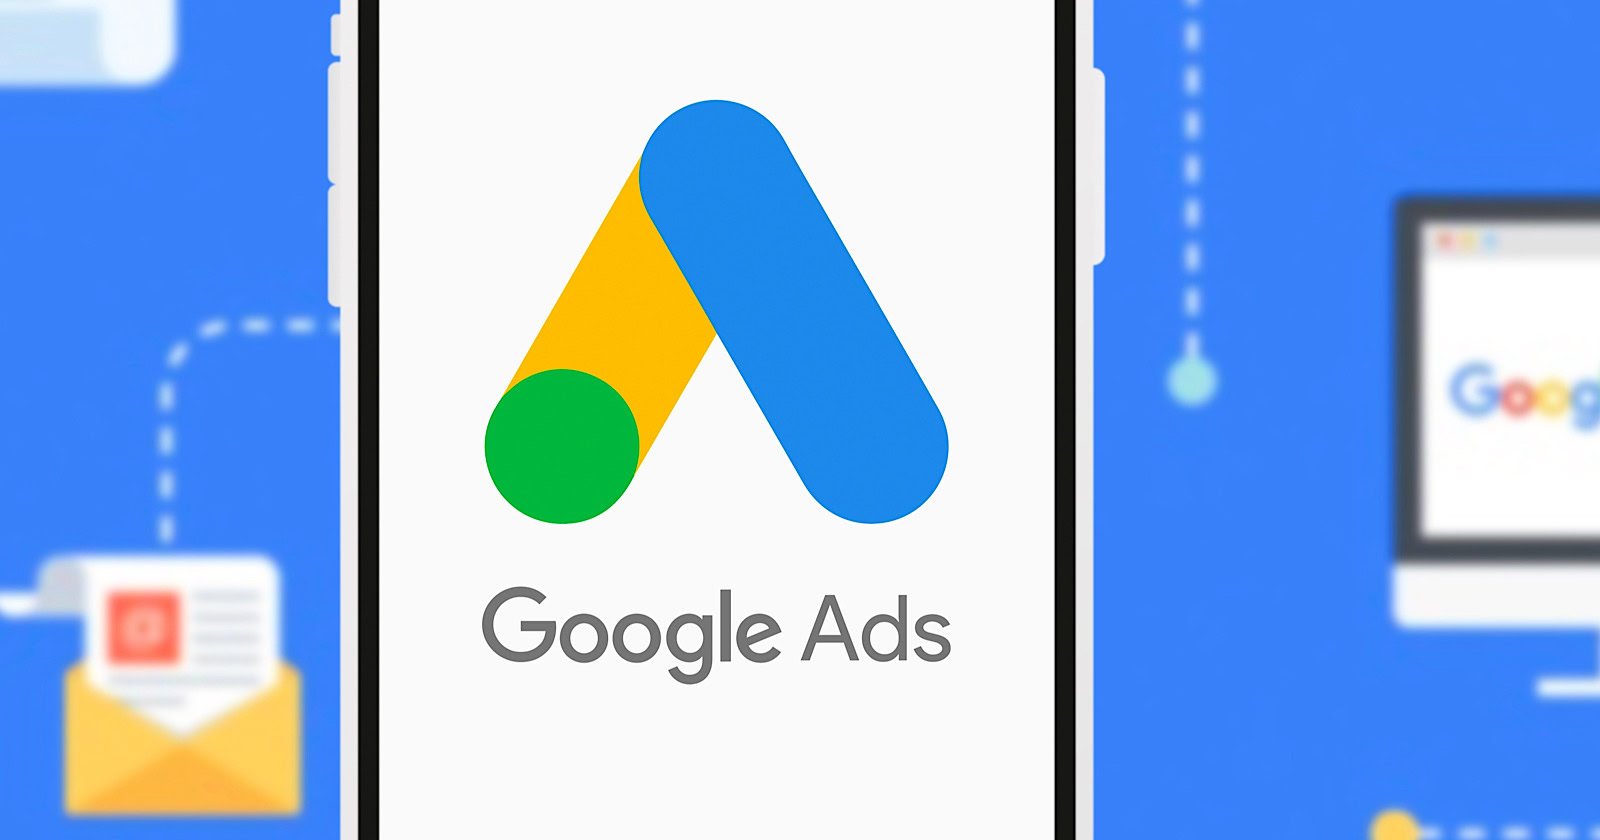 Smart phone with the Google Ads logo is a service and program of the company Google.